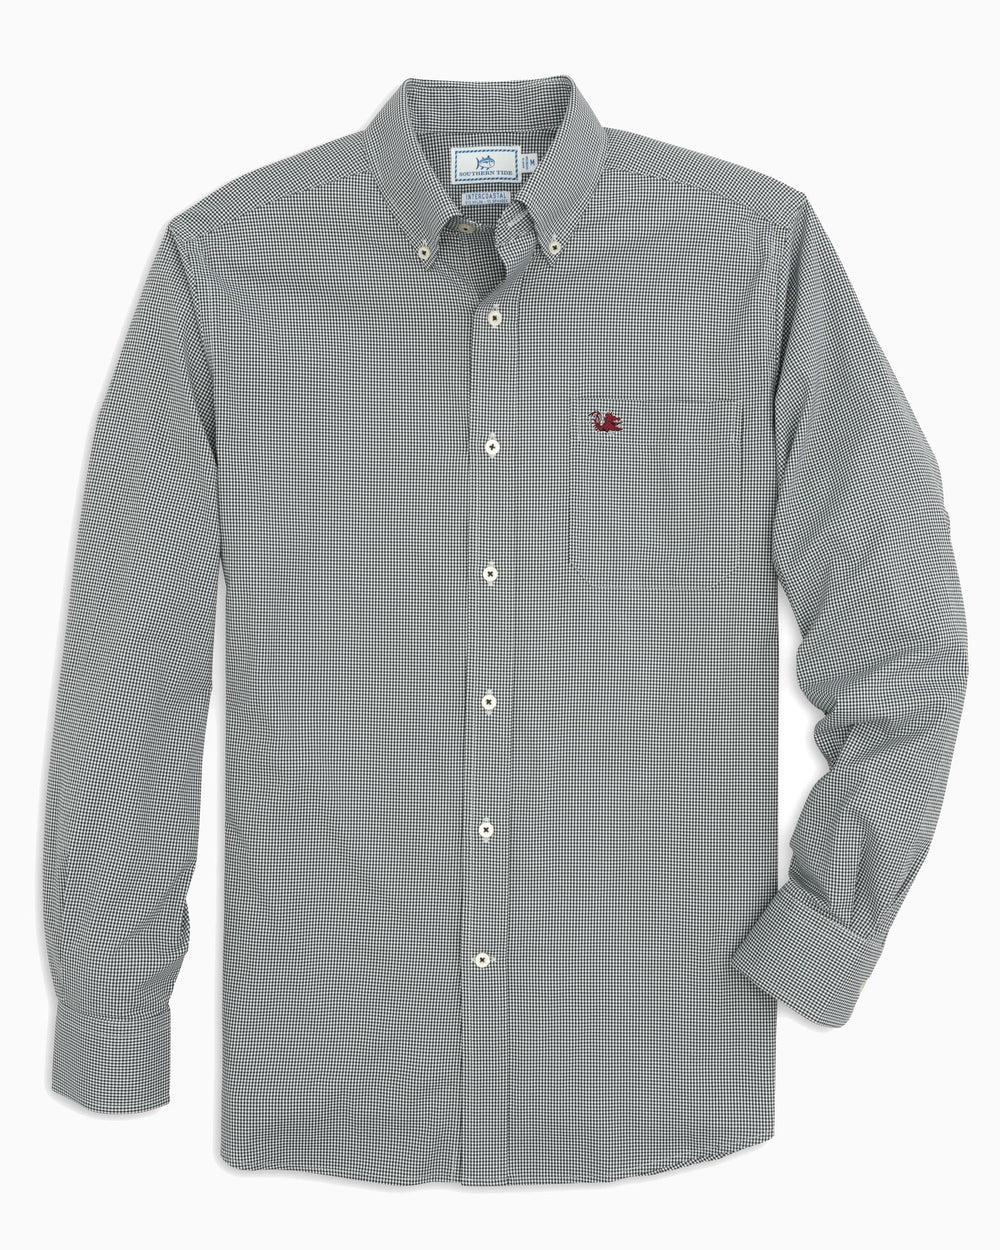 The front view of the Men's Black USC Gamecocks Gingham Button Down Shirt by Southern Tide - Black